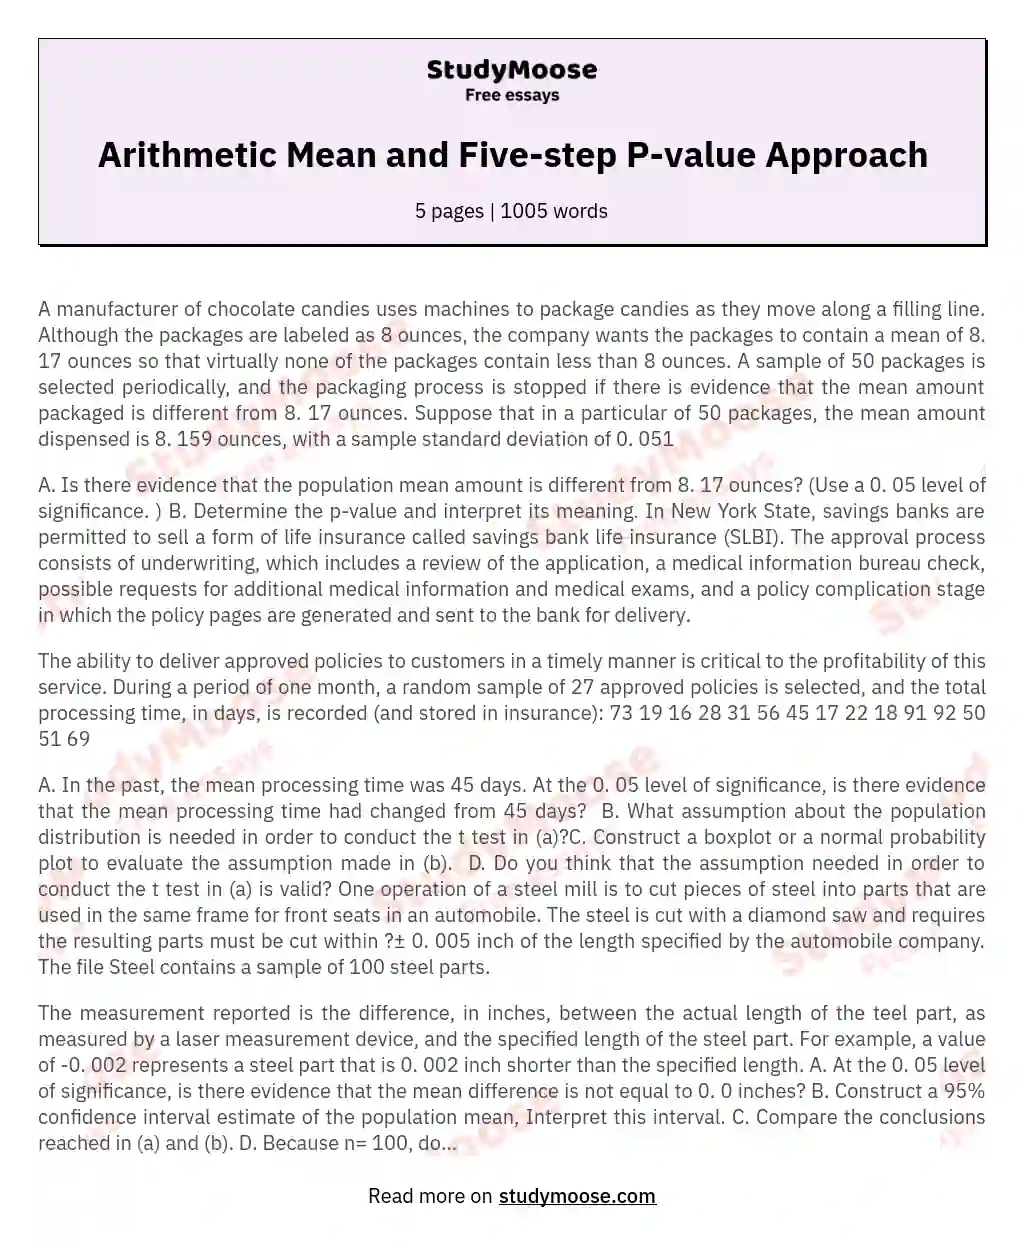 Arithmetic Mean and Five-step P-value Approach essay